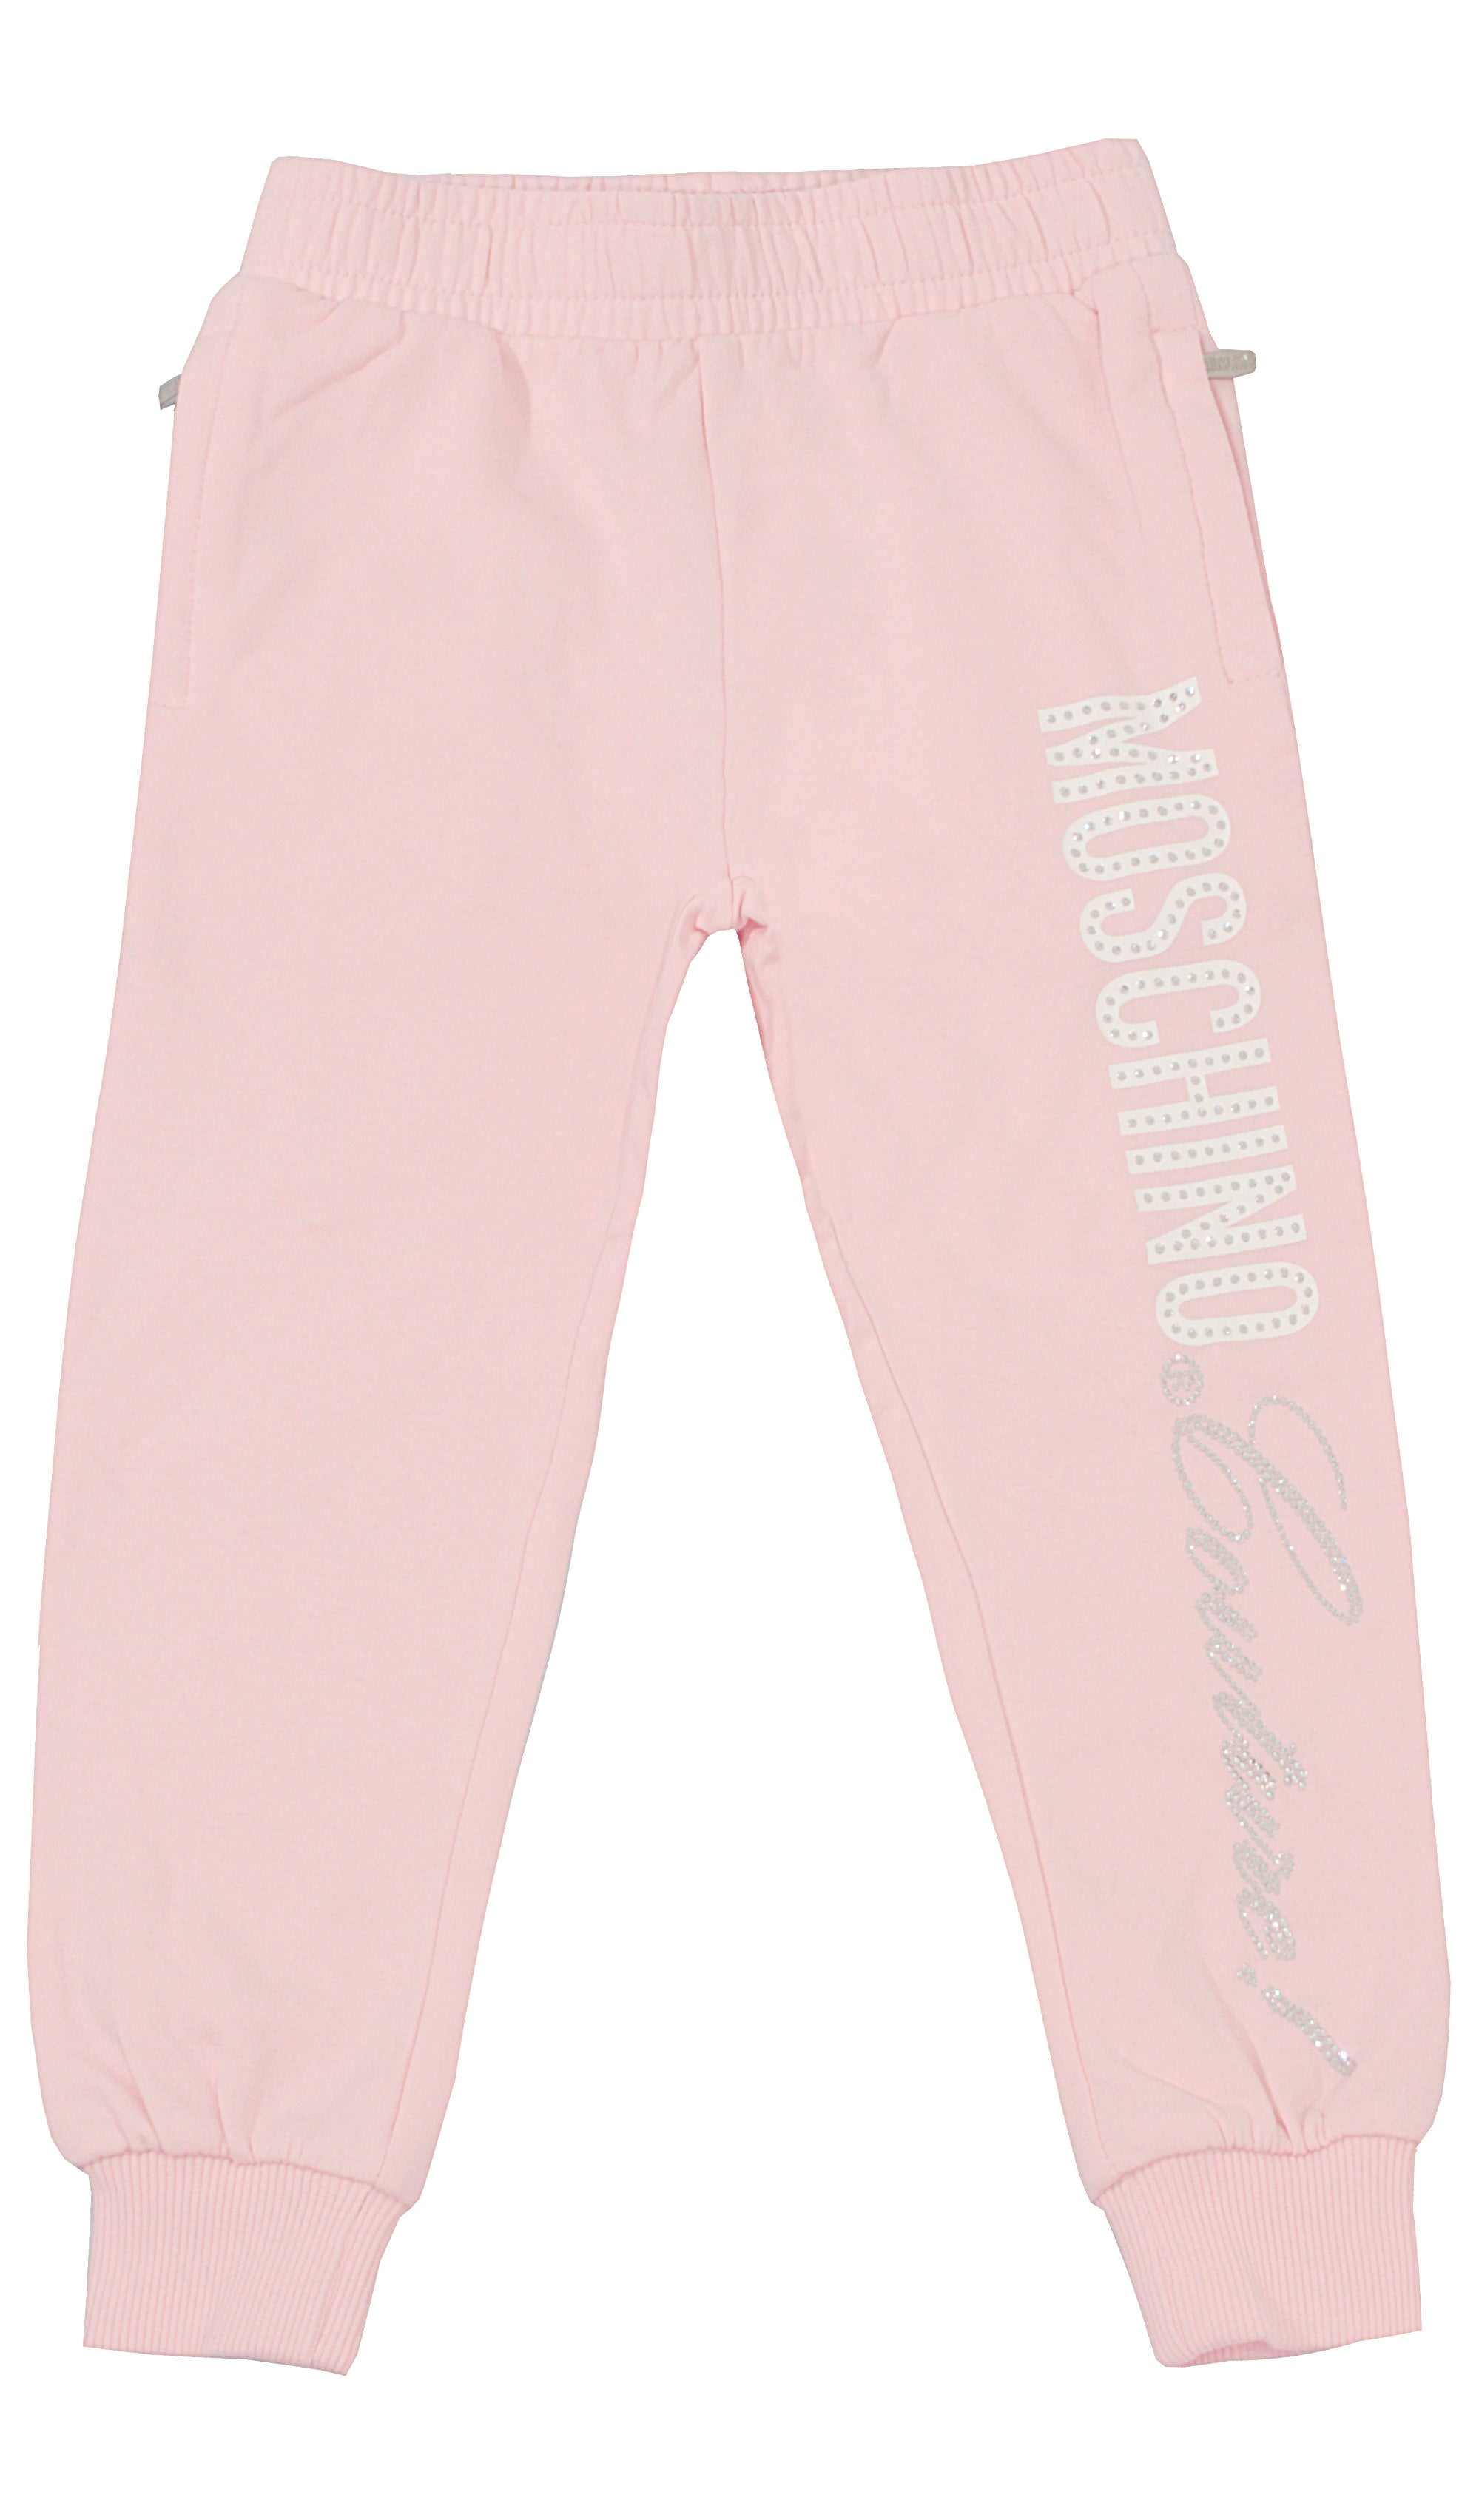 Sweatpants With Zip Up Pockets and Rhinestones - Pink